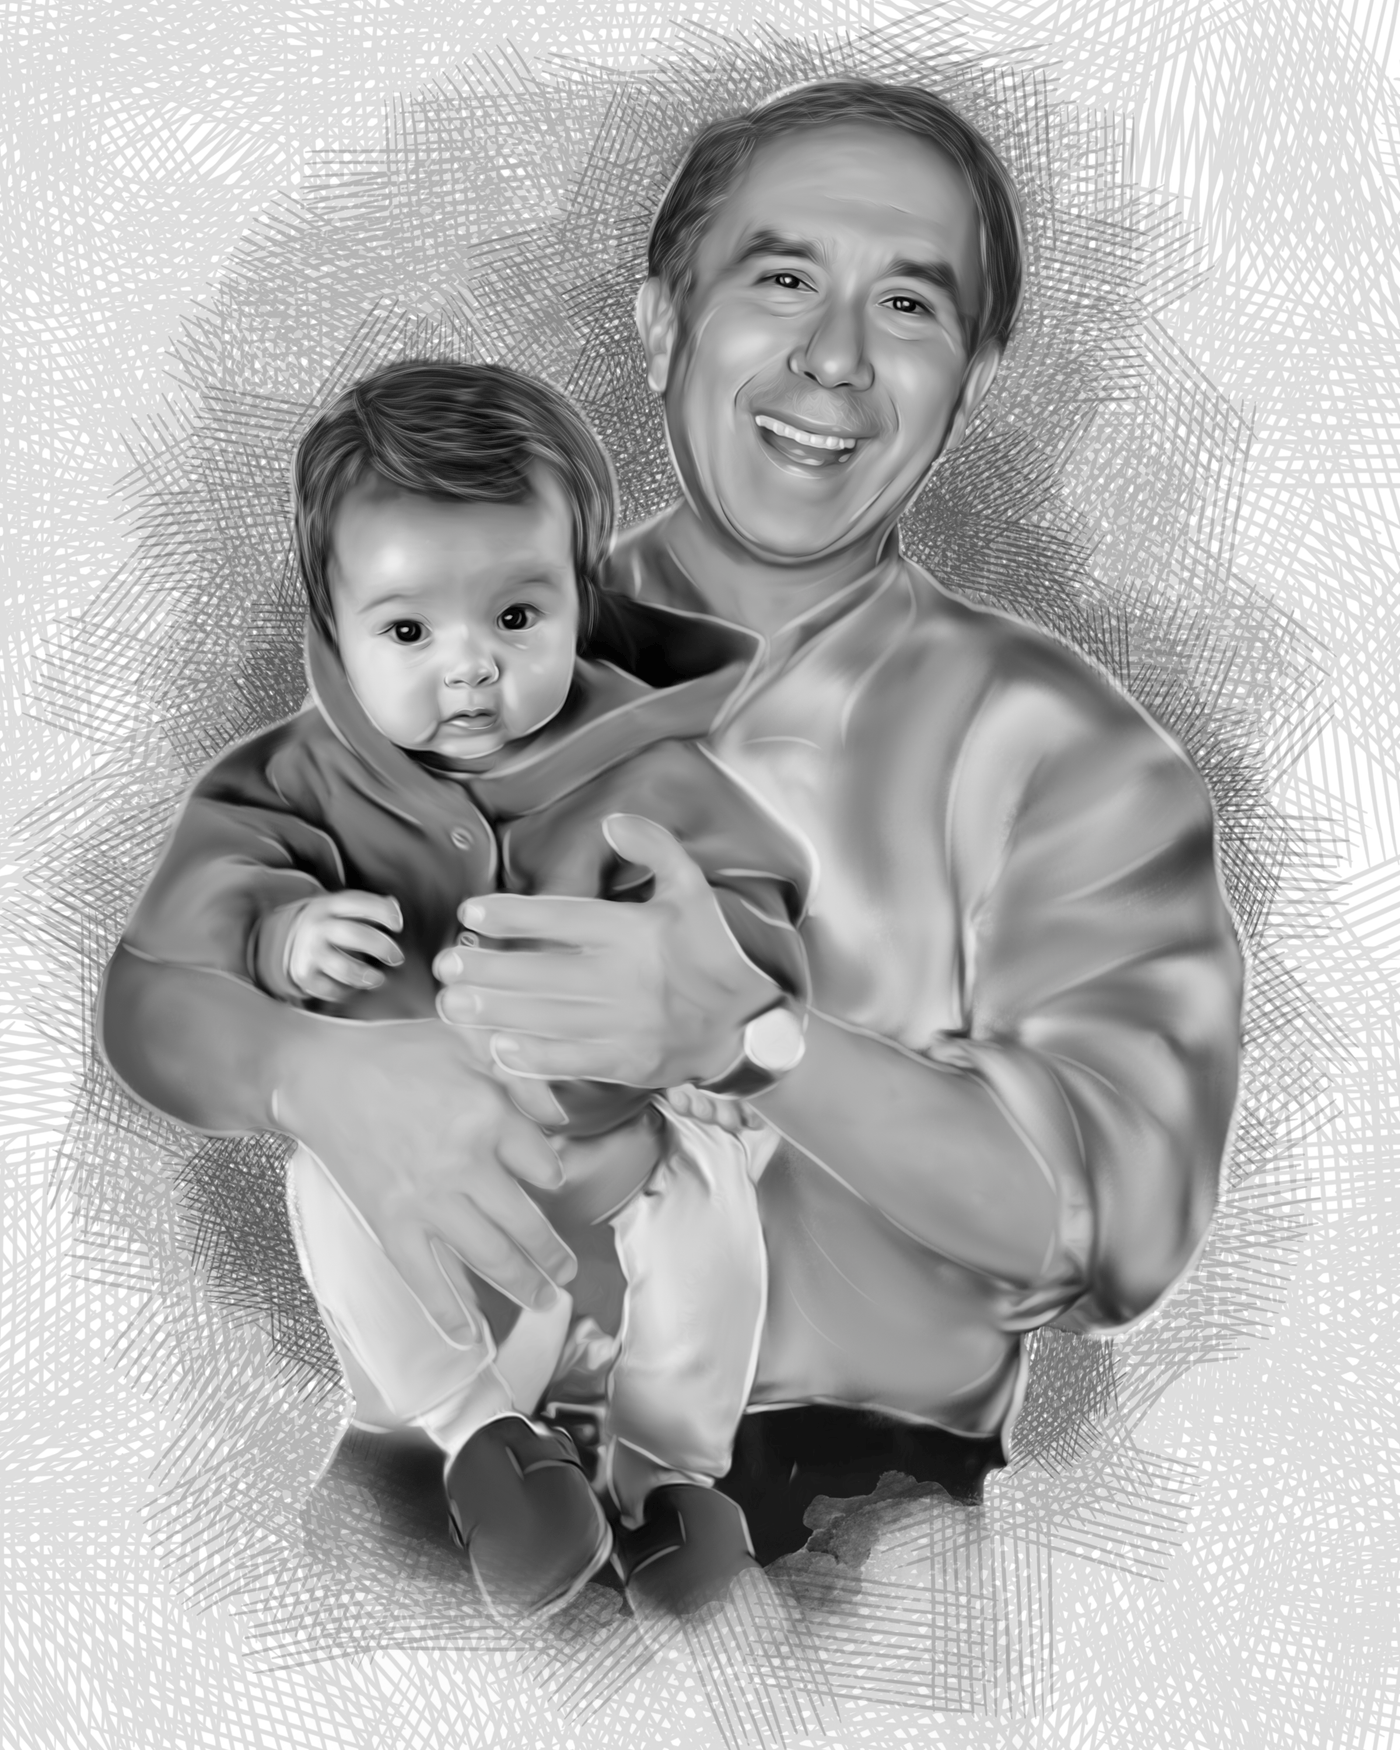 Custom Baby Charcoal Drawing of a father with his cute baby drawn in black and white